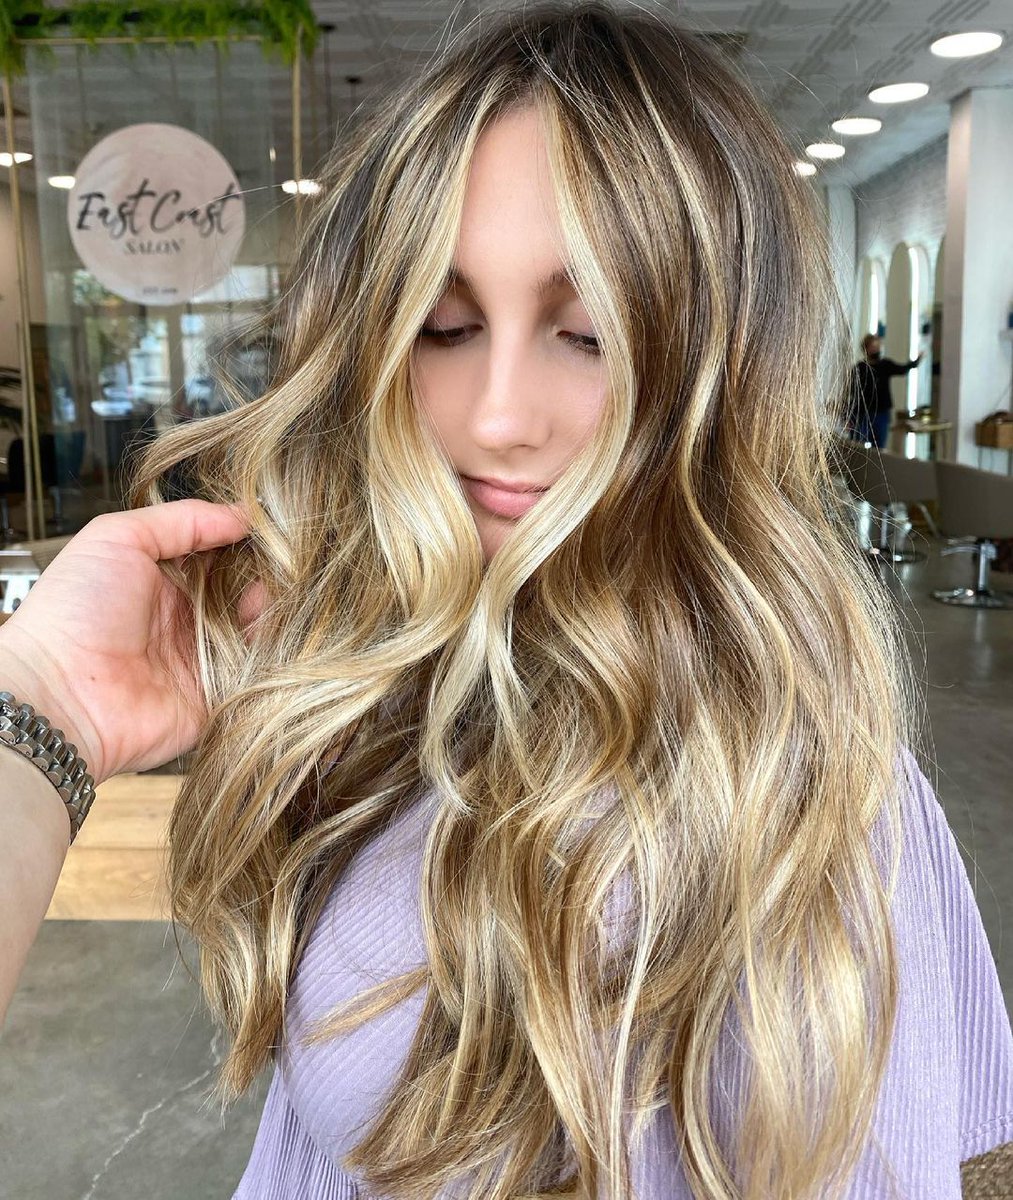 60 Golden Blonde Hair Ideas for Great Look

More You Can Find Here • stylesoverdose.com/60-golden-blon…

#goldbalayage #goldenbalayage #goldenblonde #goldenblondebalayage #goldenblondehair #goldenblondehaircolor #goldenblondehighlights #goldenbrownhair #goldenbrownhaircolor #goldenhai...